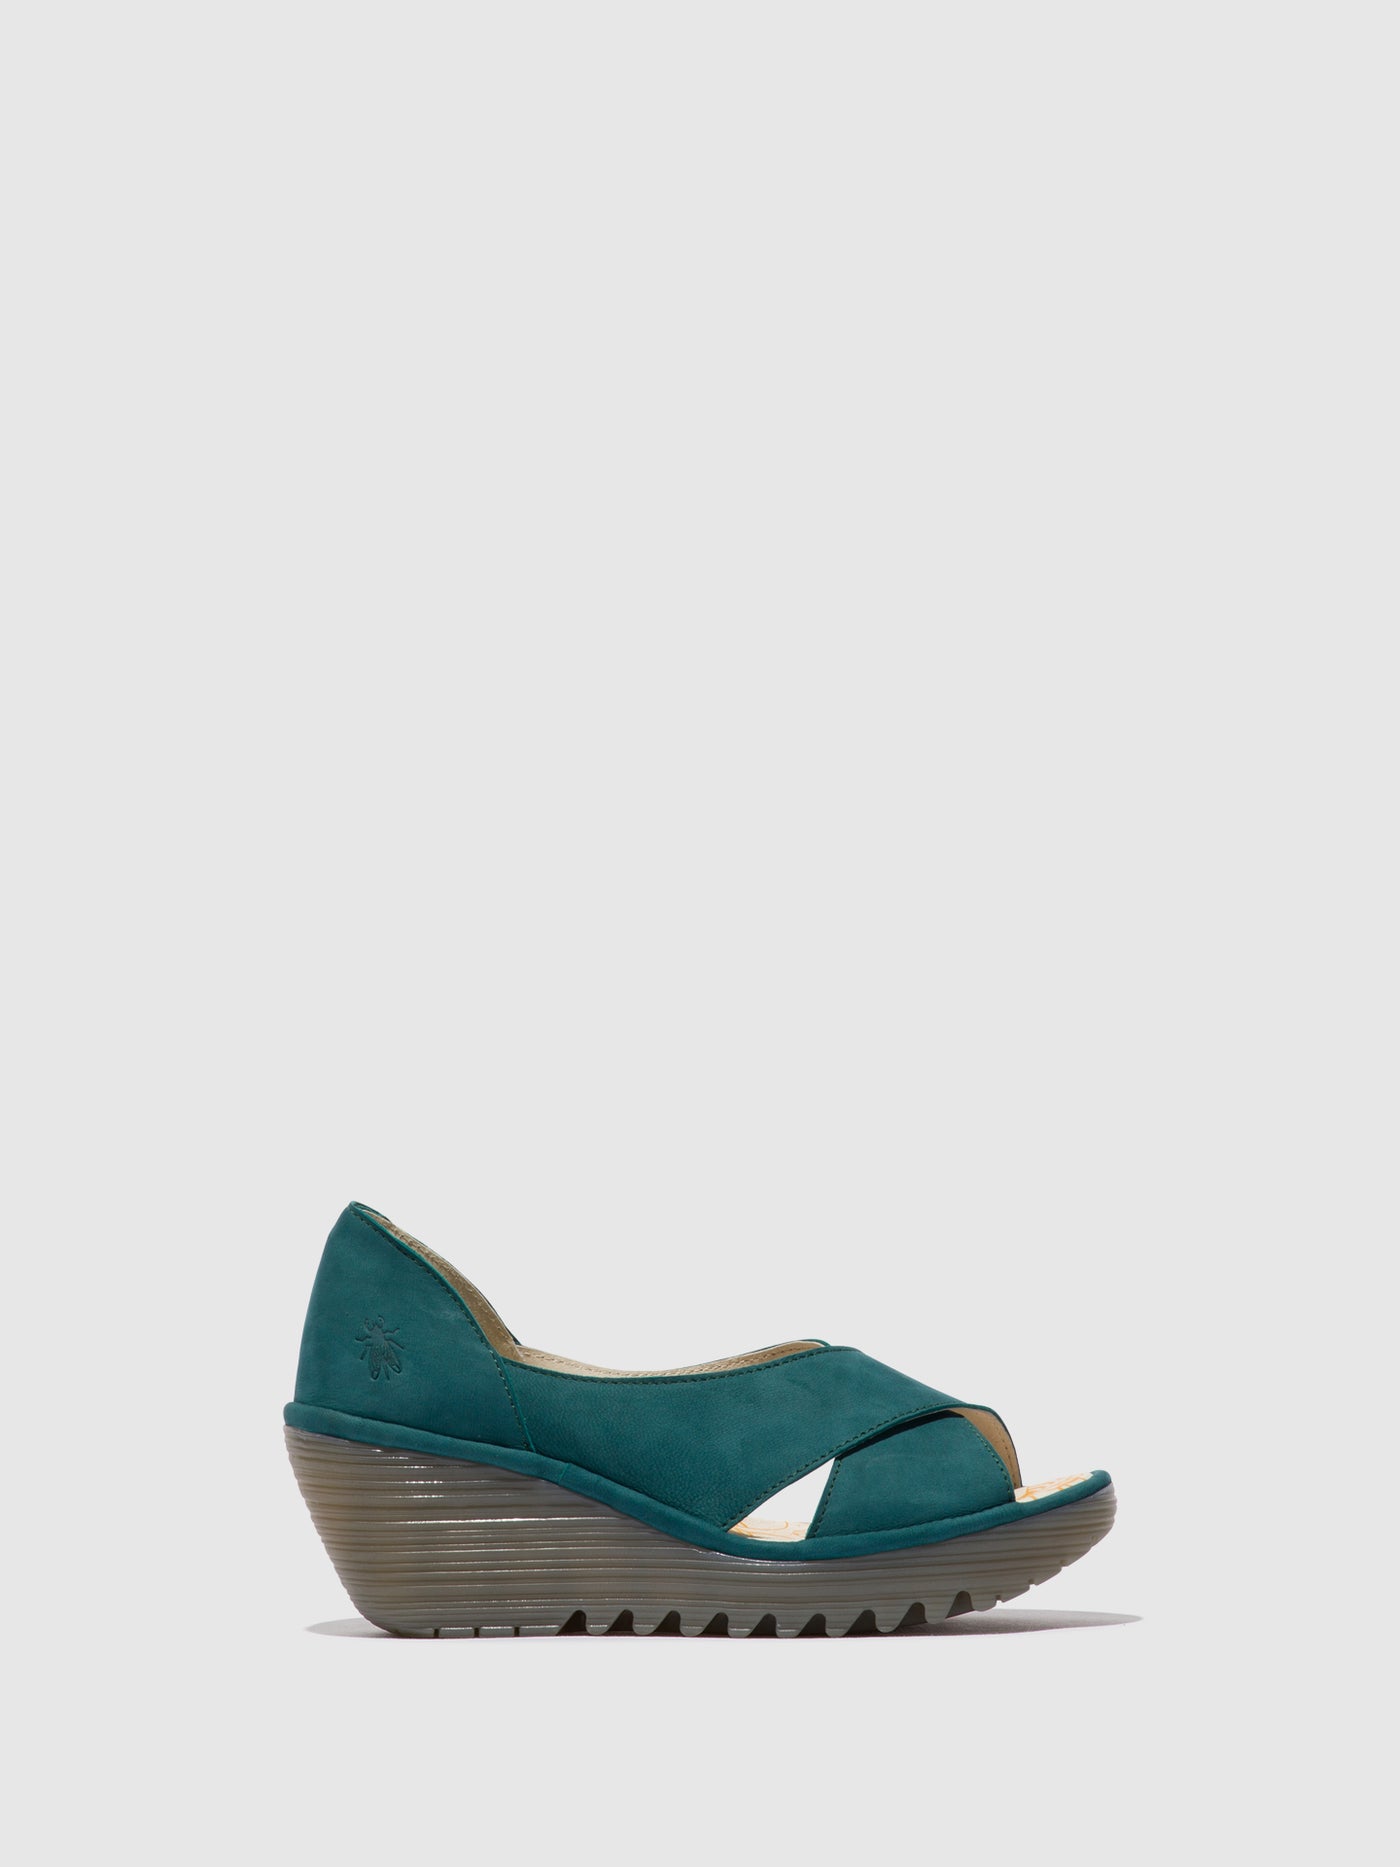 Crossover Sandals YOMA307FLY TEAL